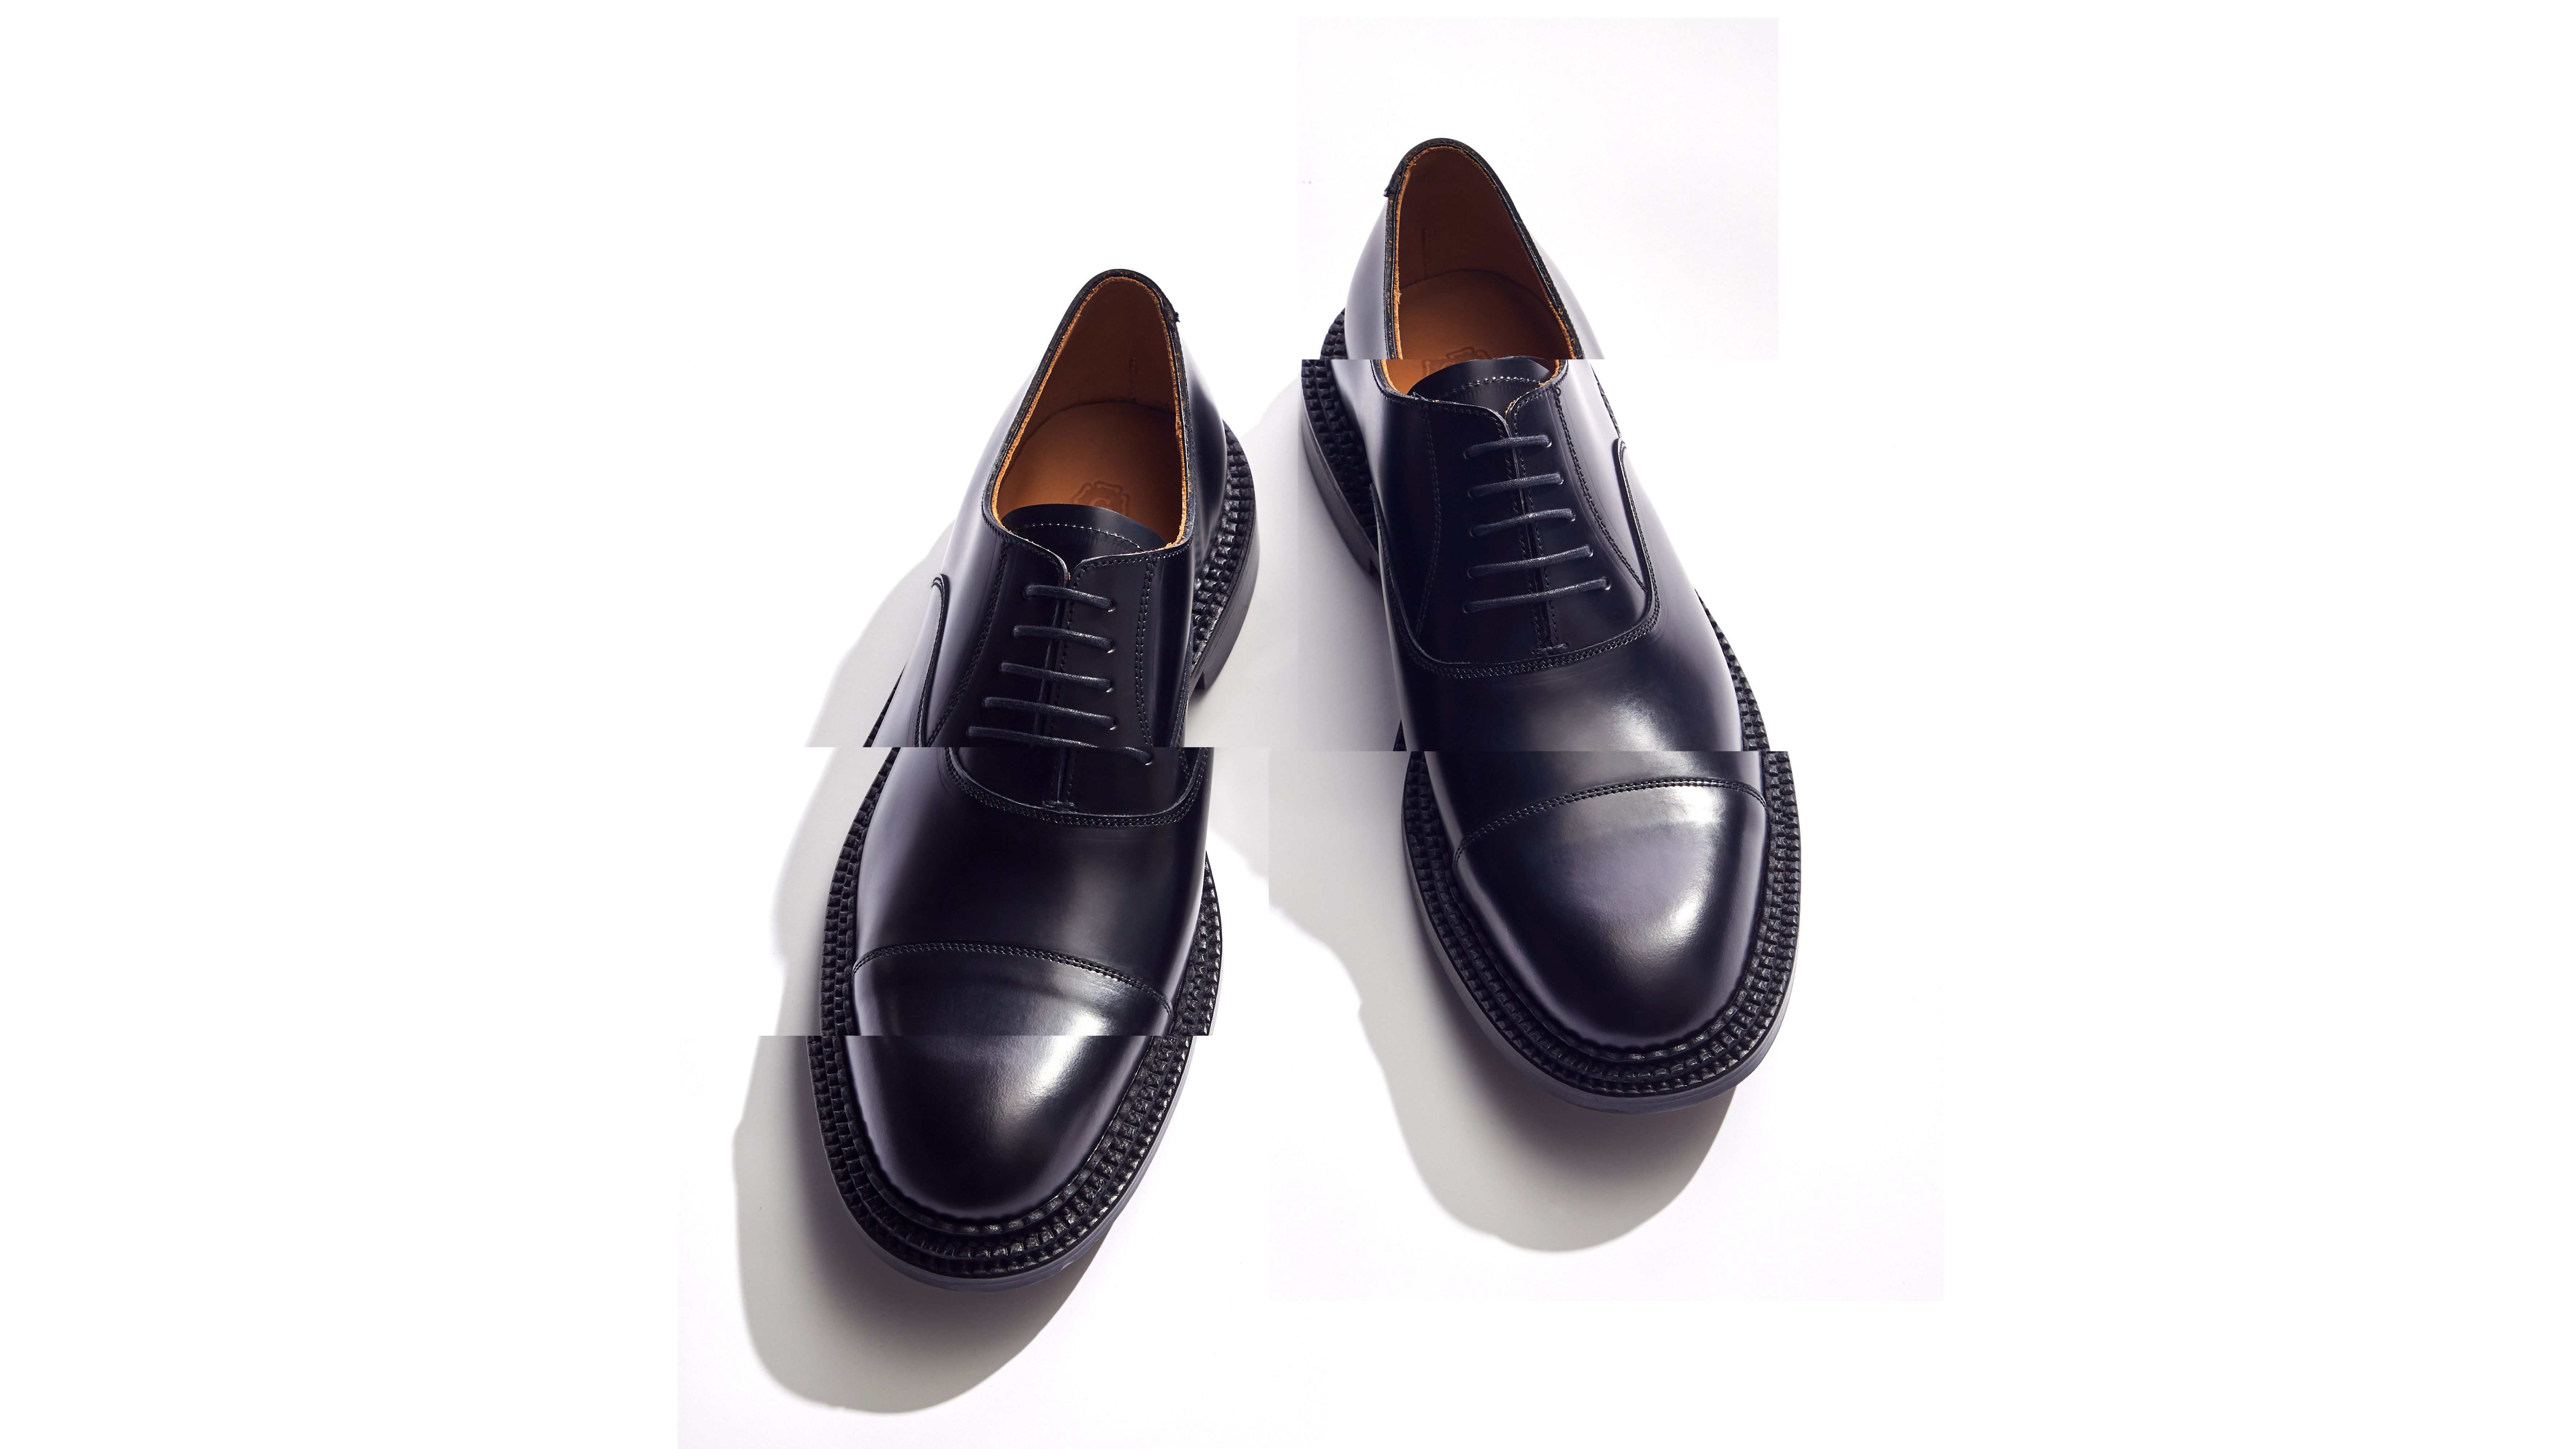 Grenson's Bold, Beefed-Up Oxfords Are the Answer to Boring